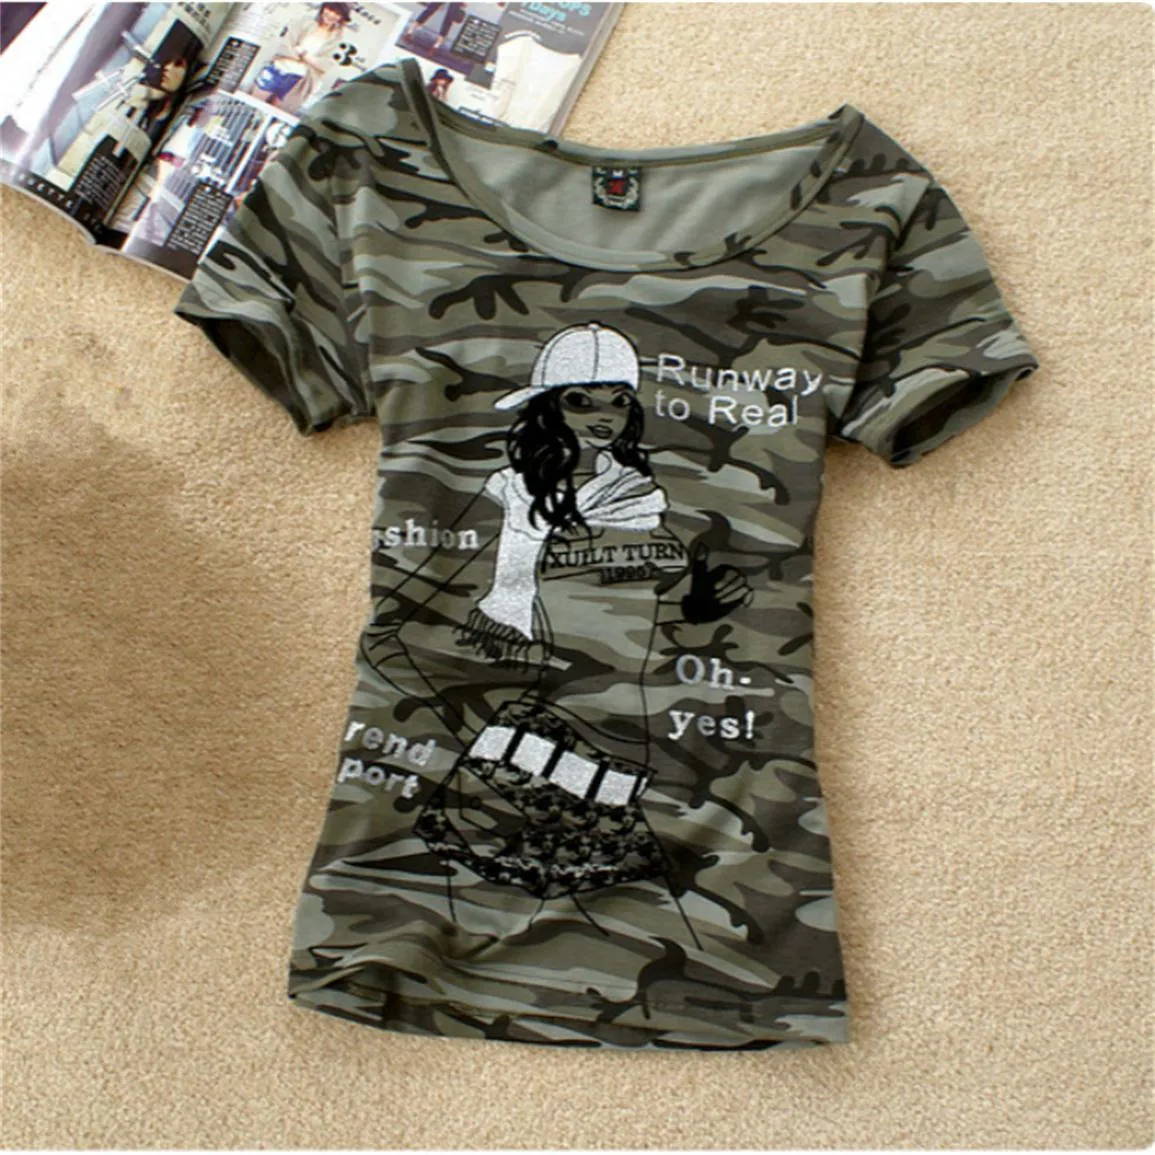 Summer Army Camouflage tshirt Women Letter Crown Printed Clothing T-shirts Students Military Uniform Short Sleeve Casual Tops